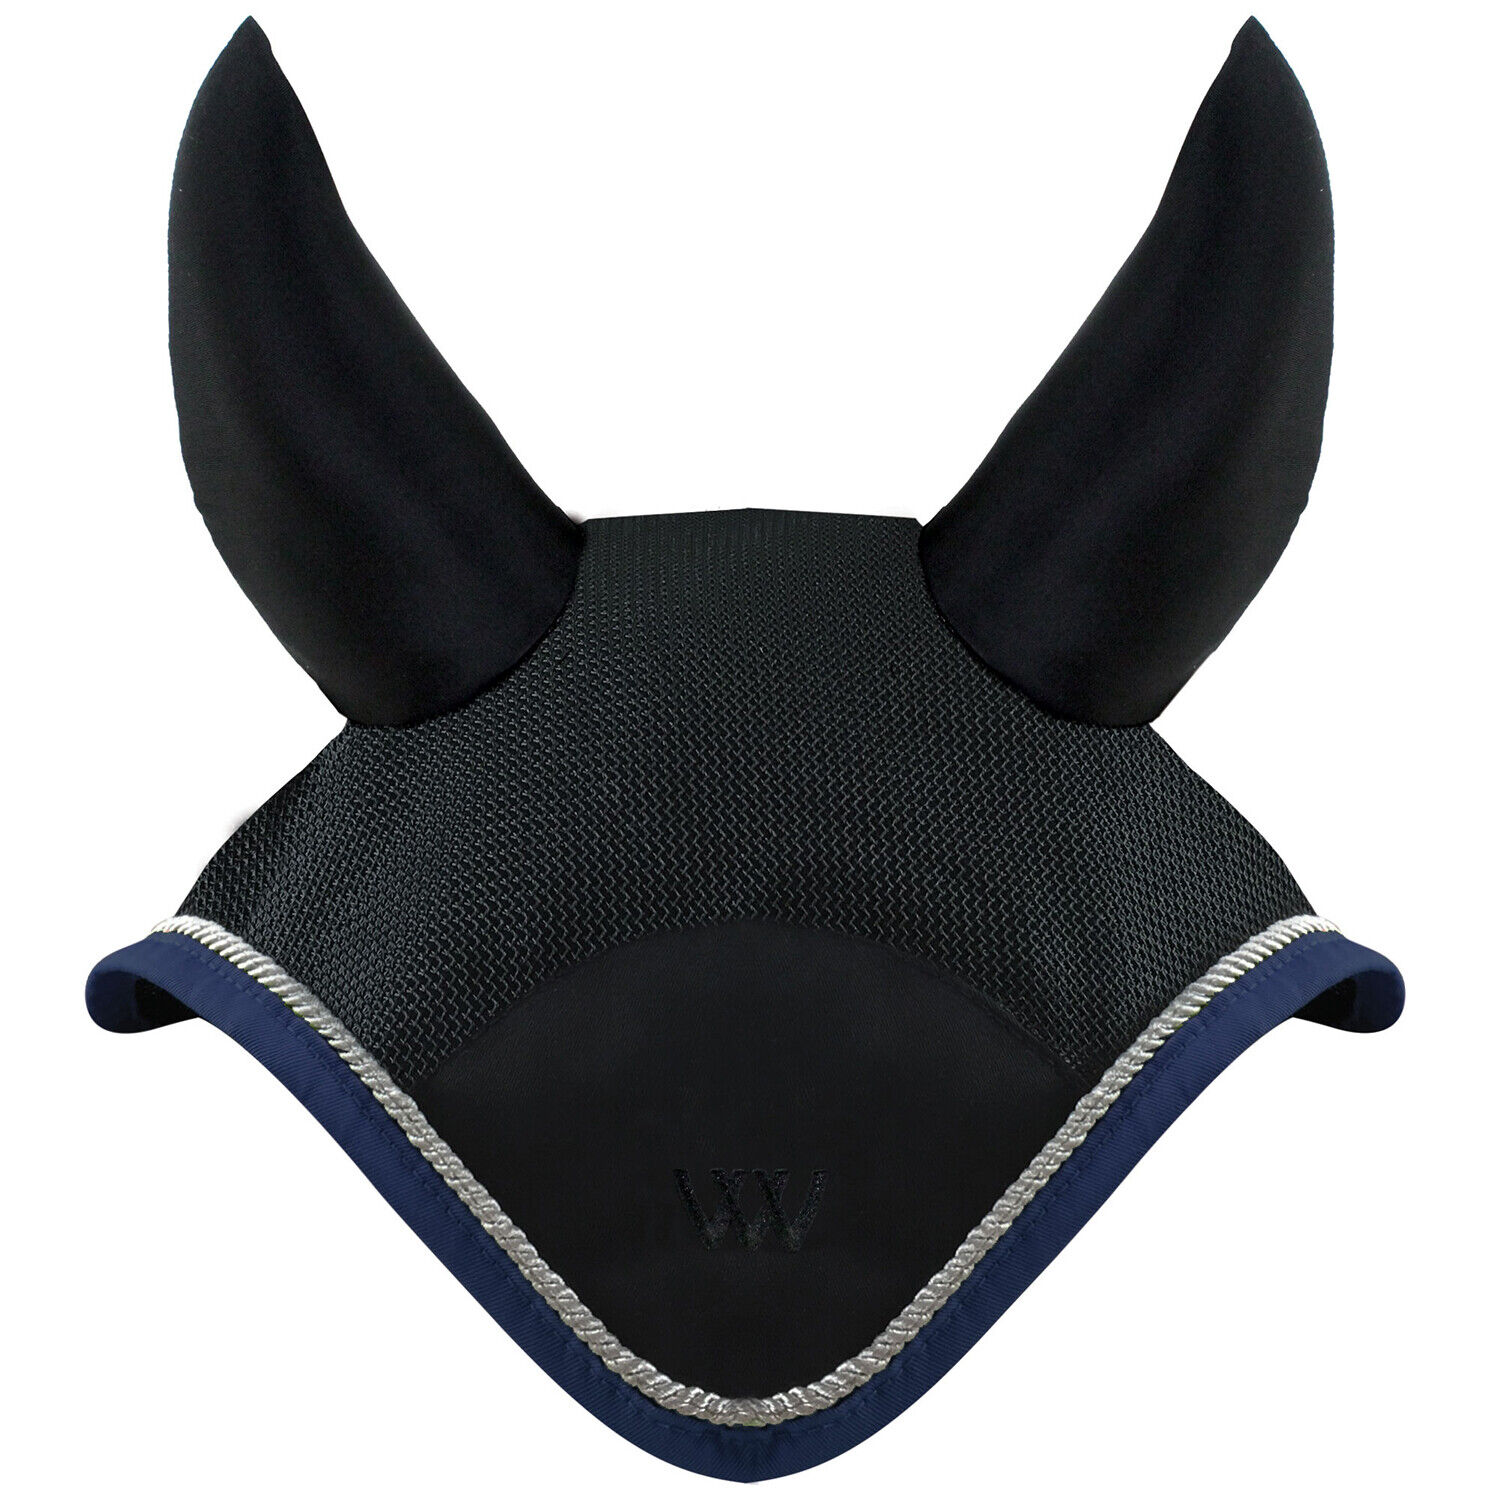 Woof Wear Noise Cancelling Horse Healthcare Fly Veil - Black Navy All Sizes